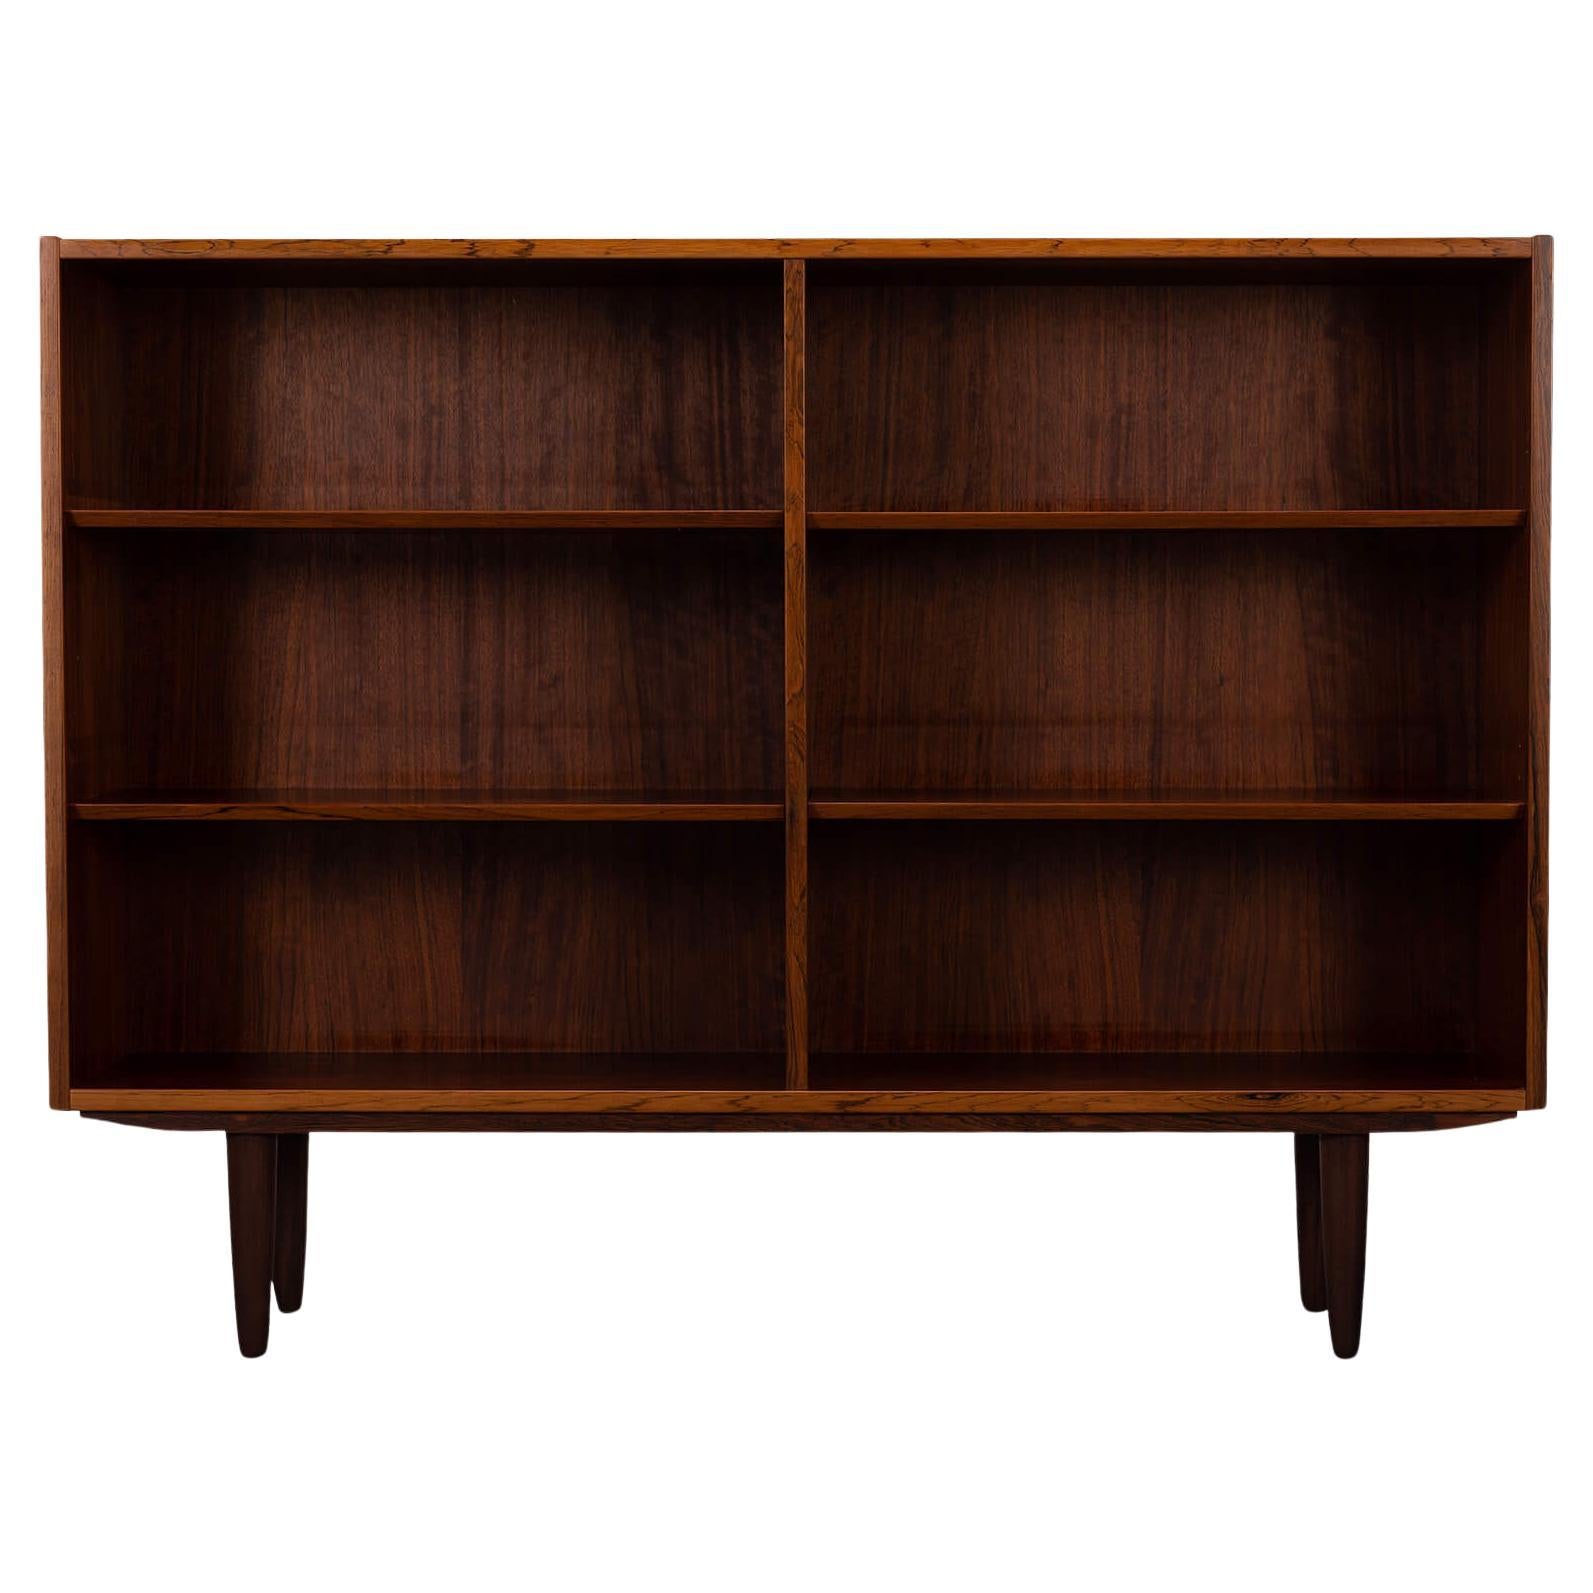 Low Rosewood Bookcase by Carlo Jensen for Hundevad & Co, 1960s